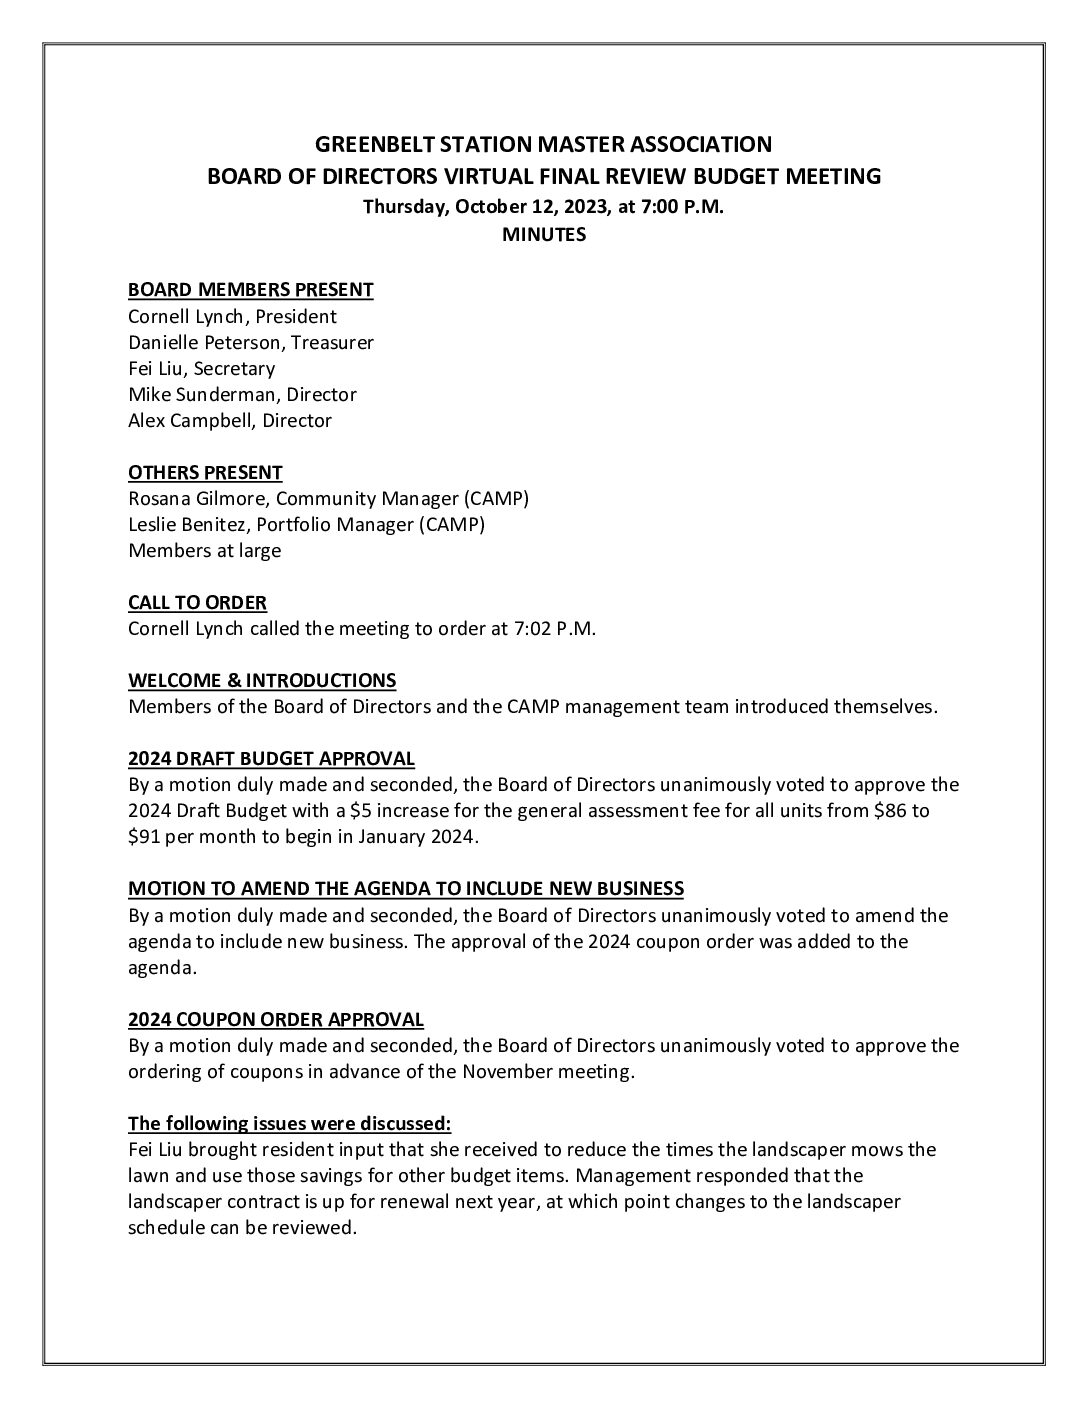 Greenbelt Station – Board Budget Meeting Minutes – 10-12-2023 – APPROVED